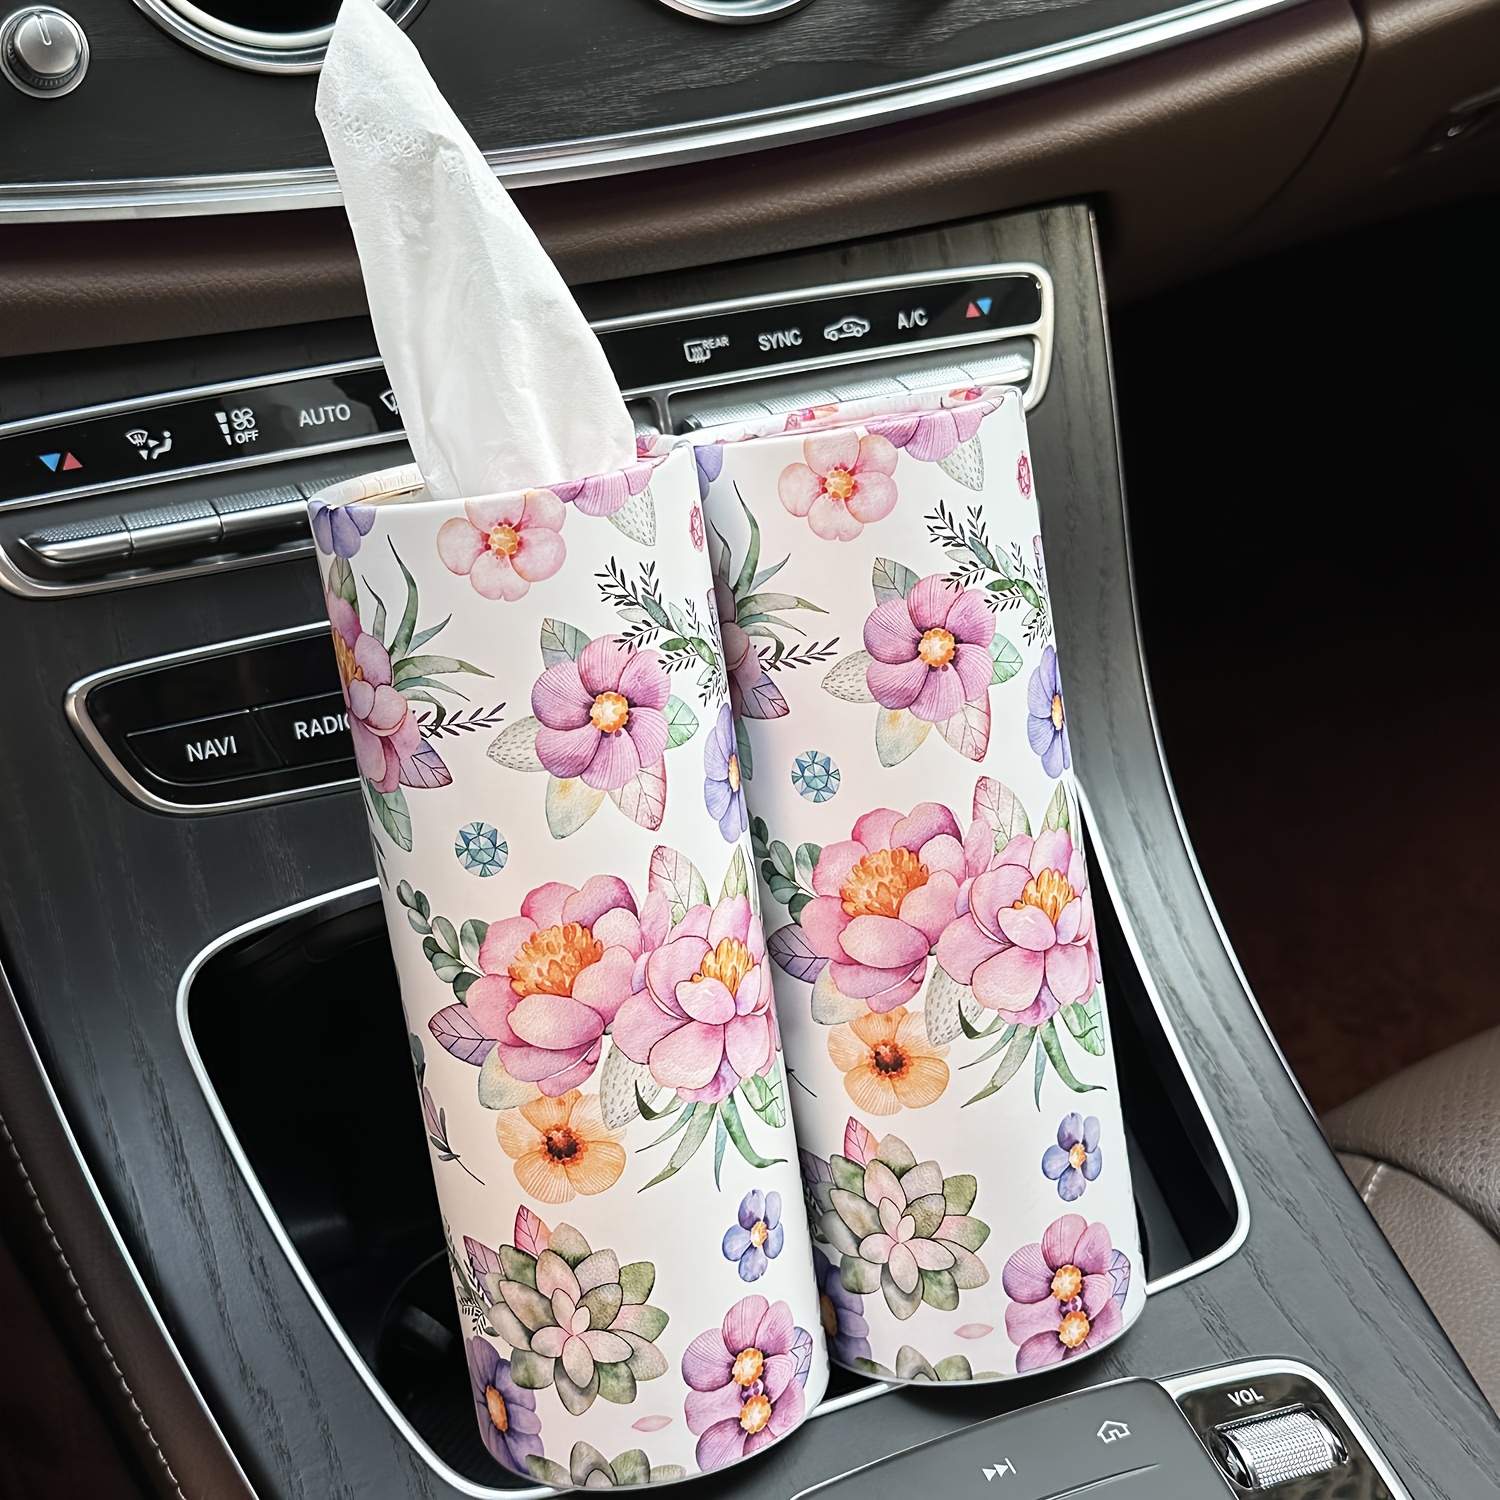 1pc White Flowers Car Tissues Box Holder with Facial Tissues - Travel  Tissue Cylinder Tube for Car Cup Holder, Round Tissue Case for Home Dining  Table